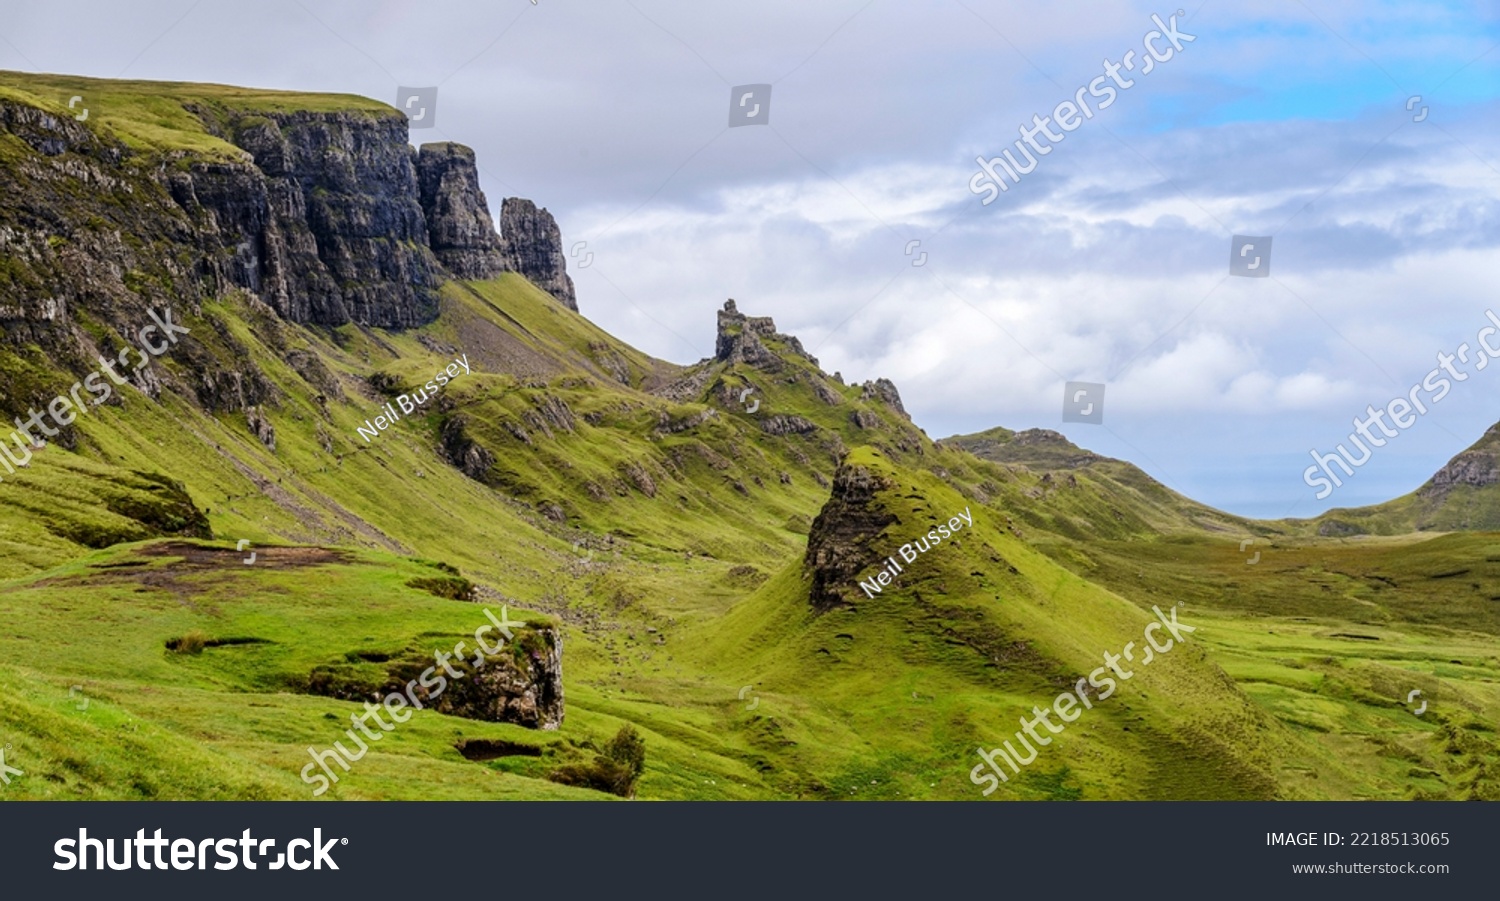 Beautiful,dramatic Scottish mountainous scenery,pointed,jagged mountain peaks and sheer cliff faces, along the Quiraing hills walk,green grass and shrub covered in the mid summer,north eastern Skye. #2218513065